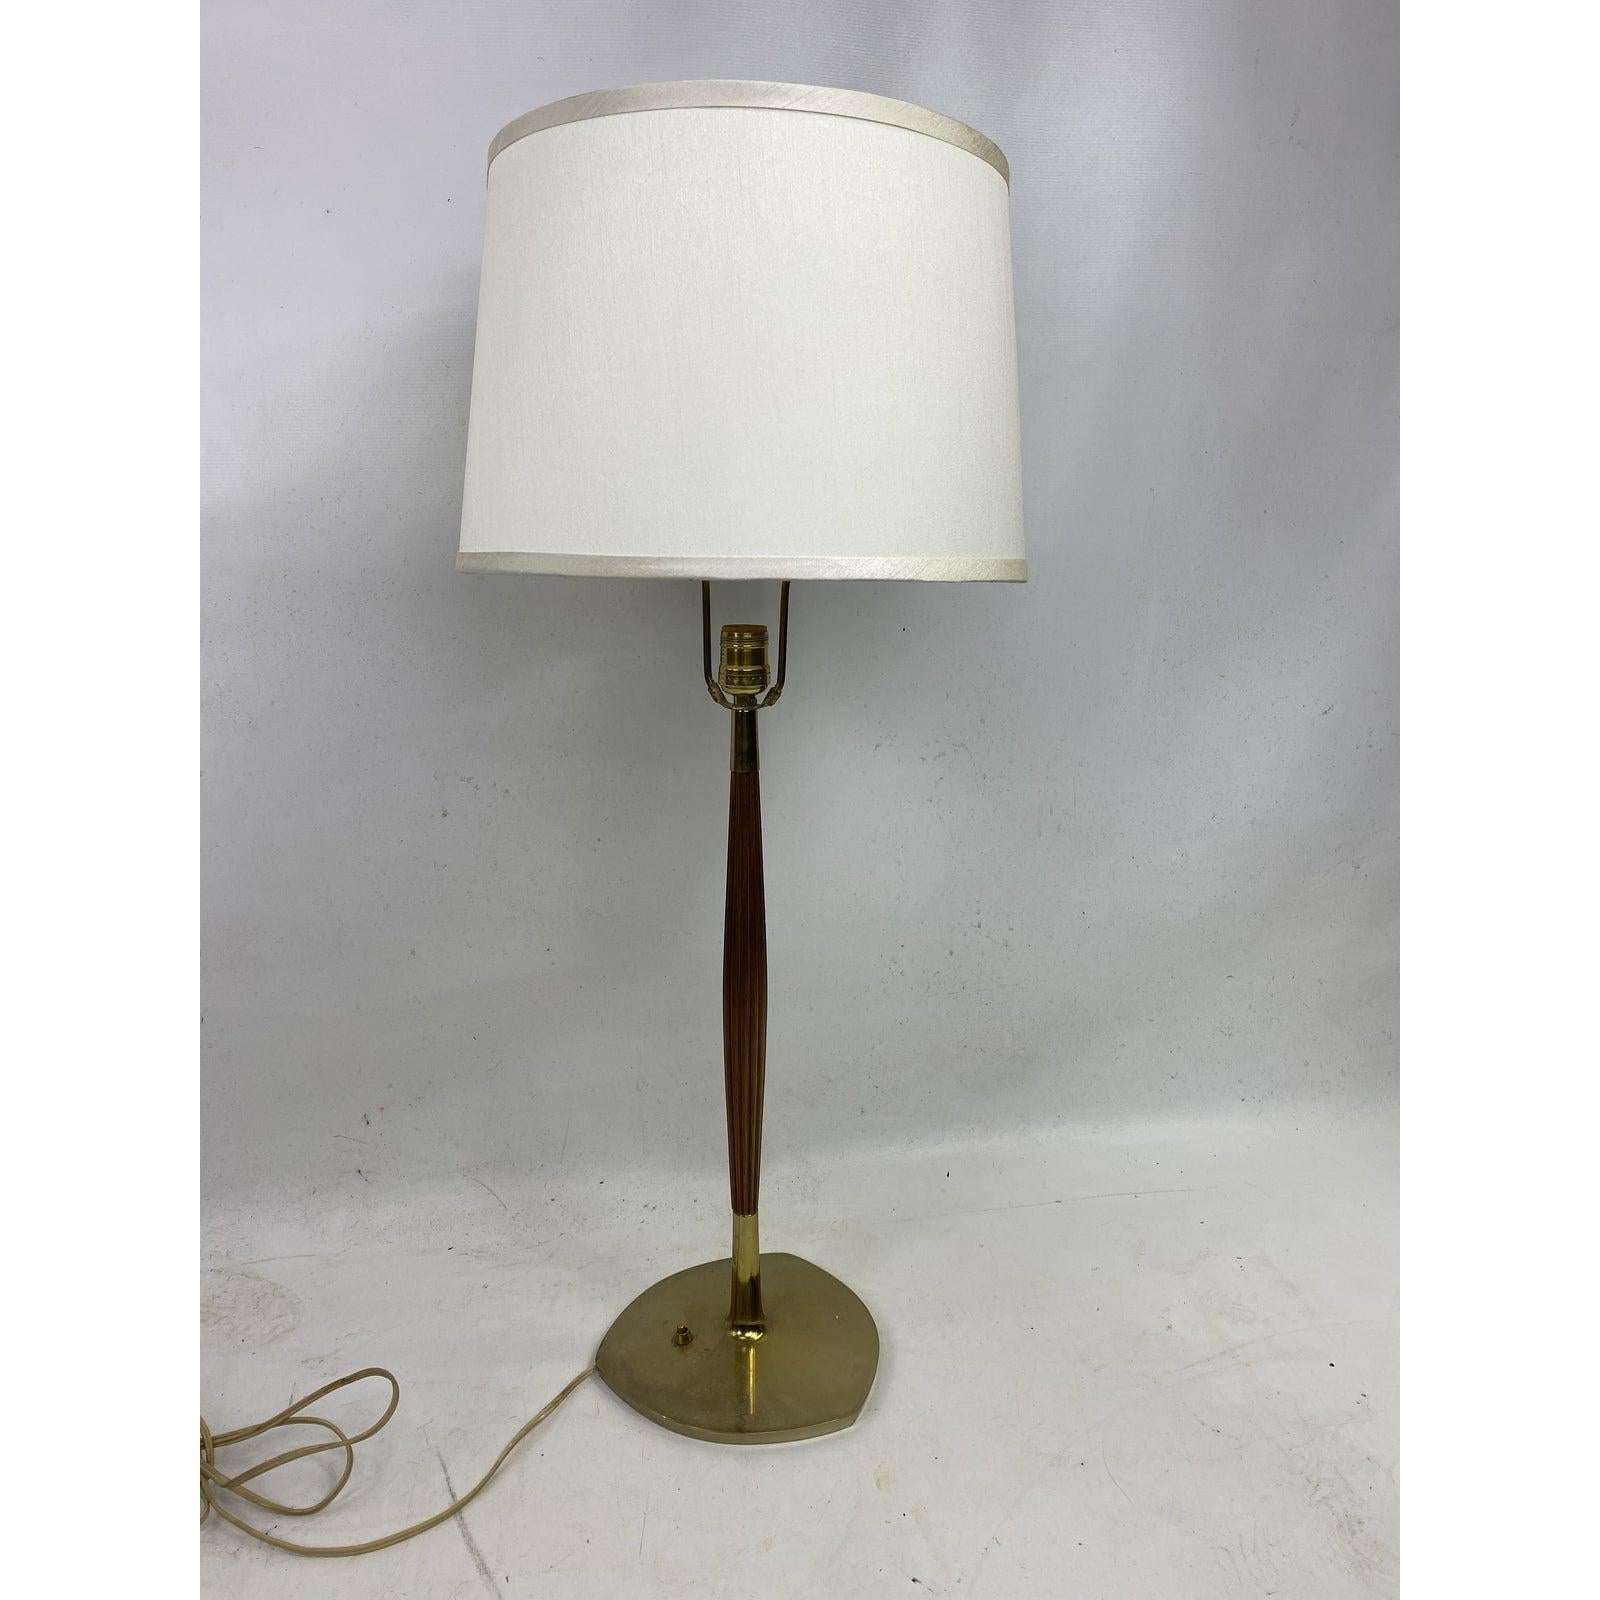 For sale is this very nice vintage modern table lamp. The lamp is walnut and brass. Also the shade is included.